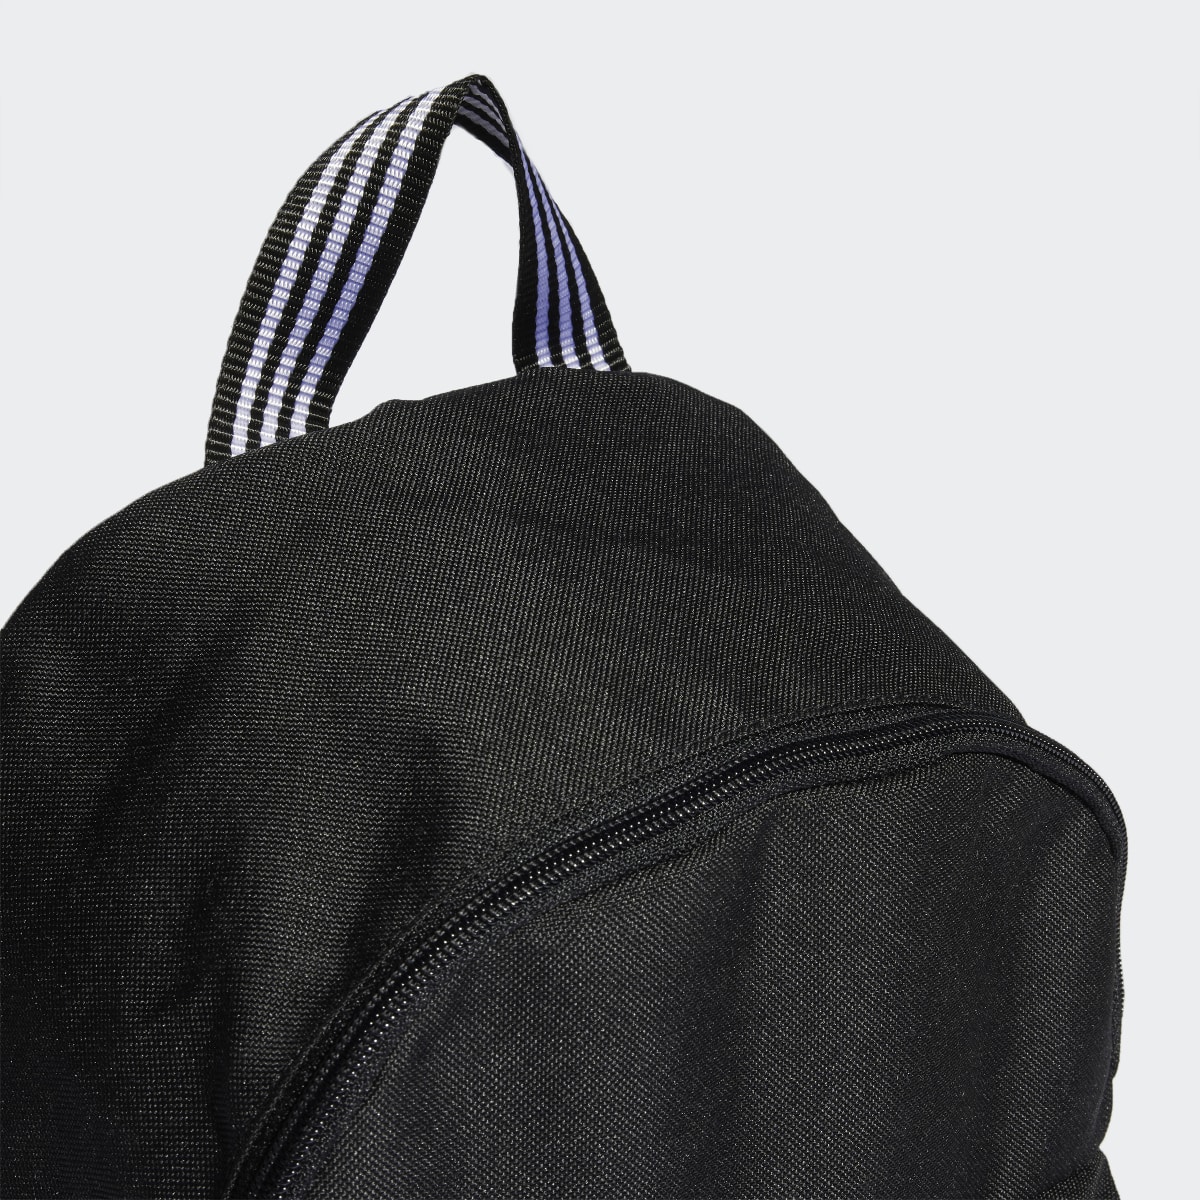 Adidas Small Adicolor Classic Backpack. 6